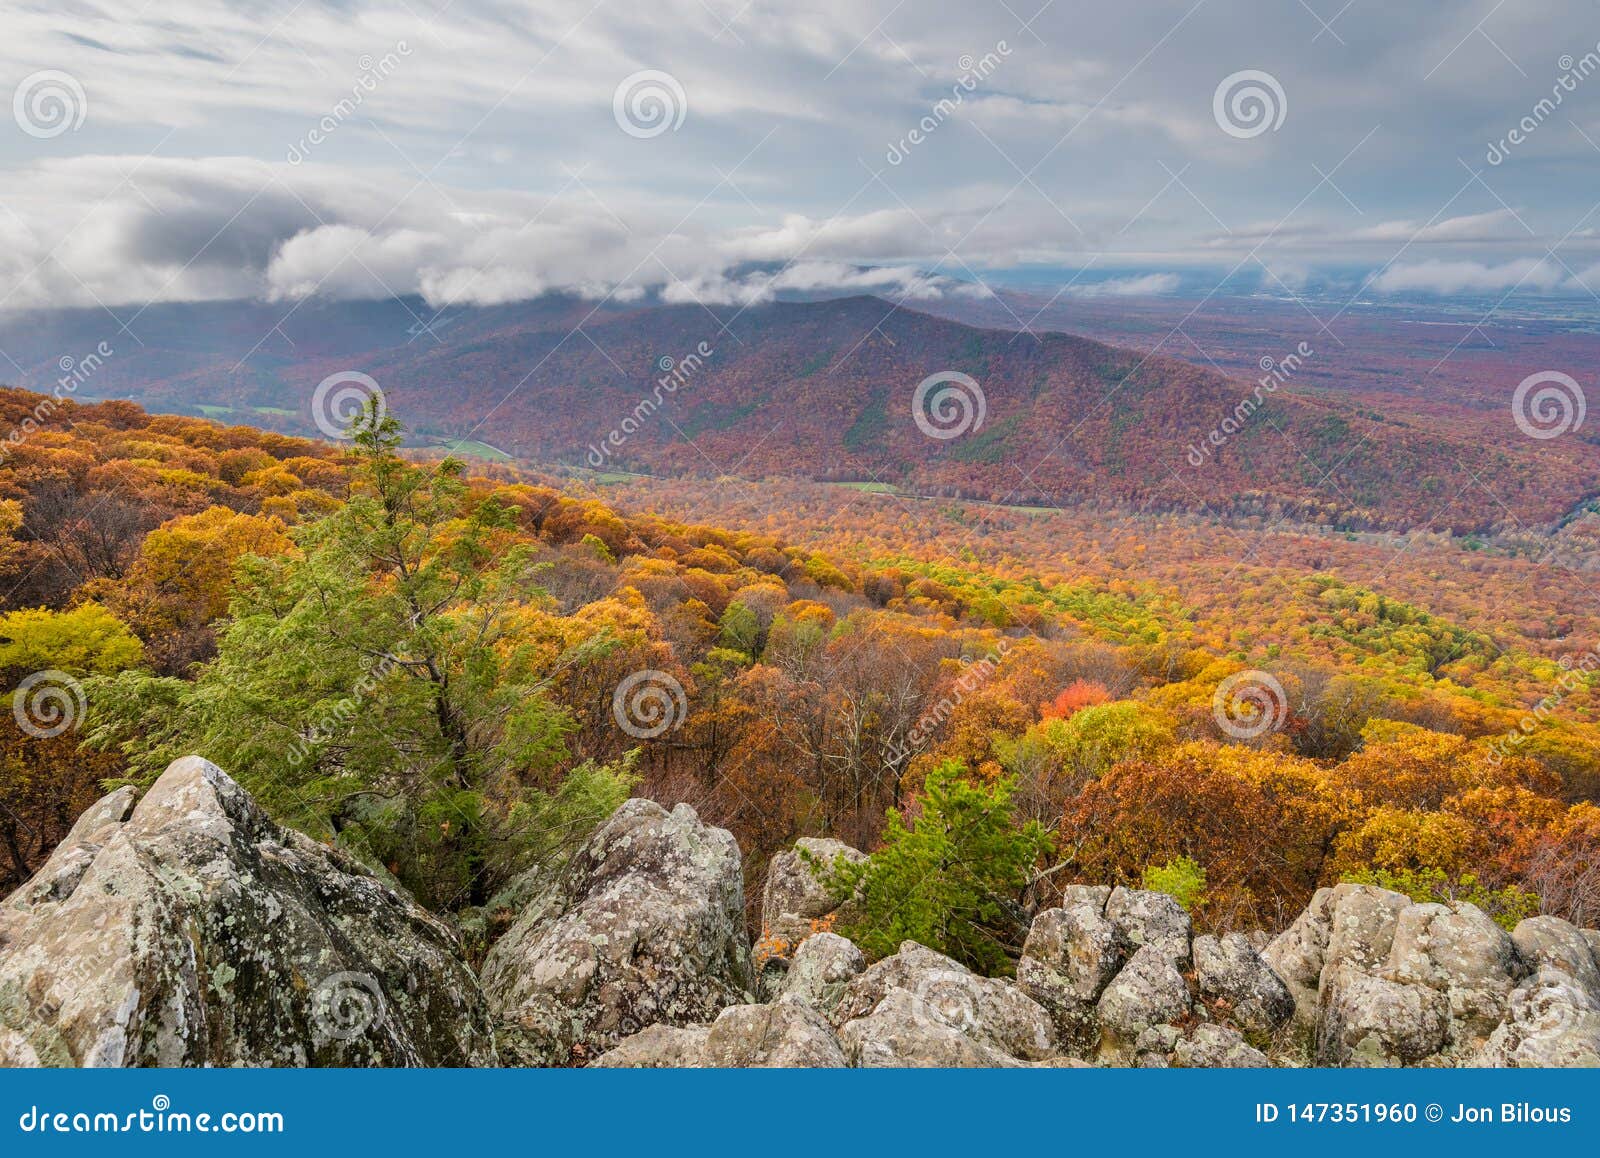 autumn view from ravens roost overlook, on the blue ridge parkway in virginia